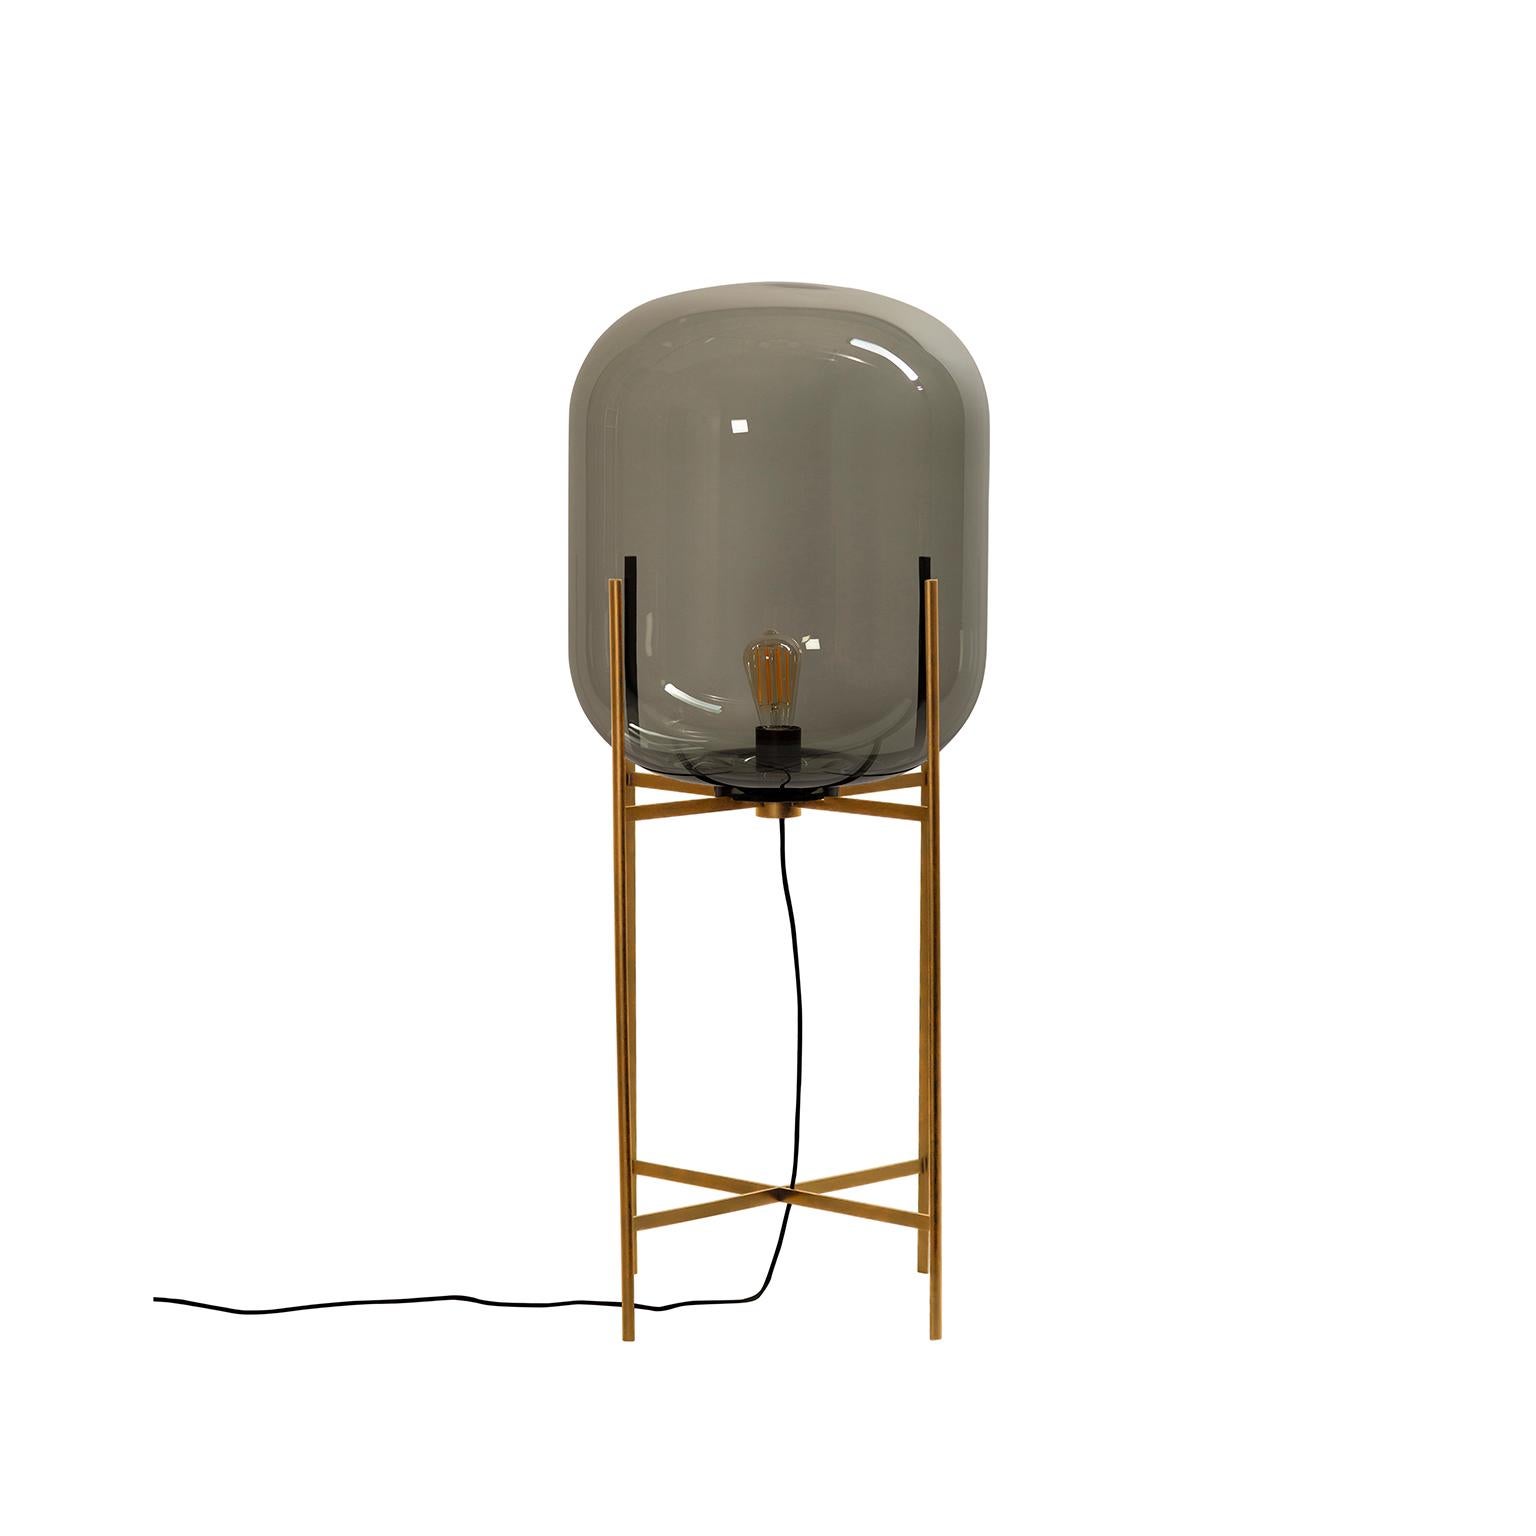 Oda floor lamp, European, Minimalist, steel grey, brass base, German, lamp, 21st century, in between size

Directly inspired by the industrial monuments photographed by the famous artists Bernd and Hilla Becher, Sebastian Herkner bundles up their